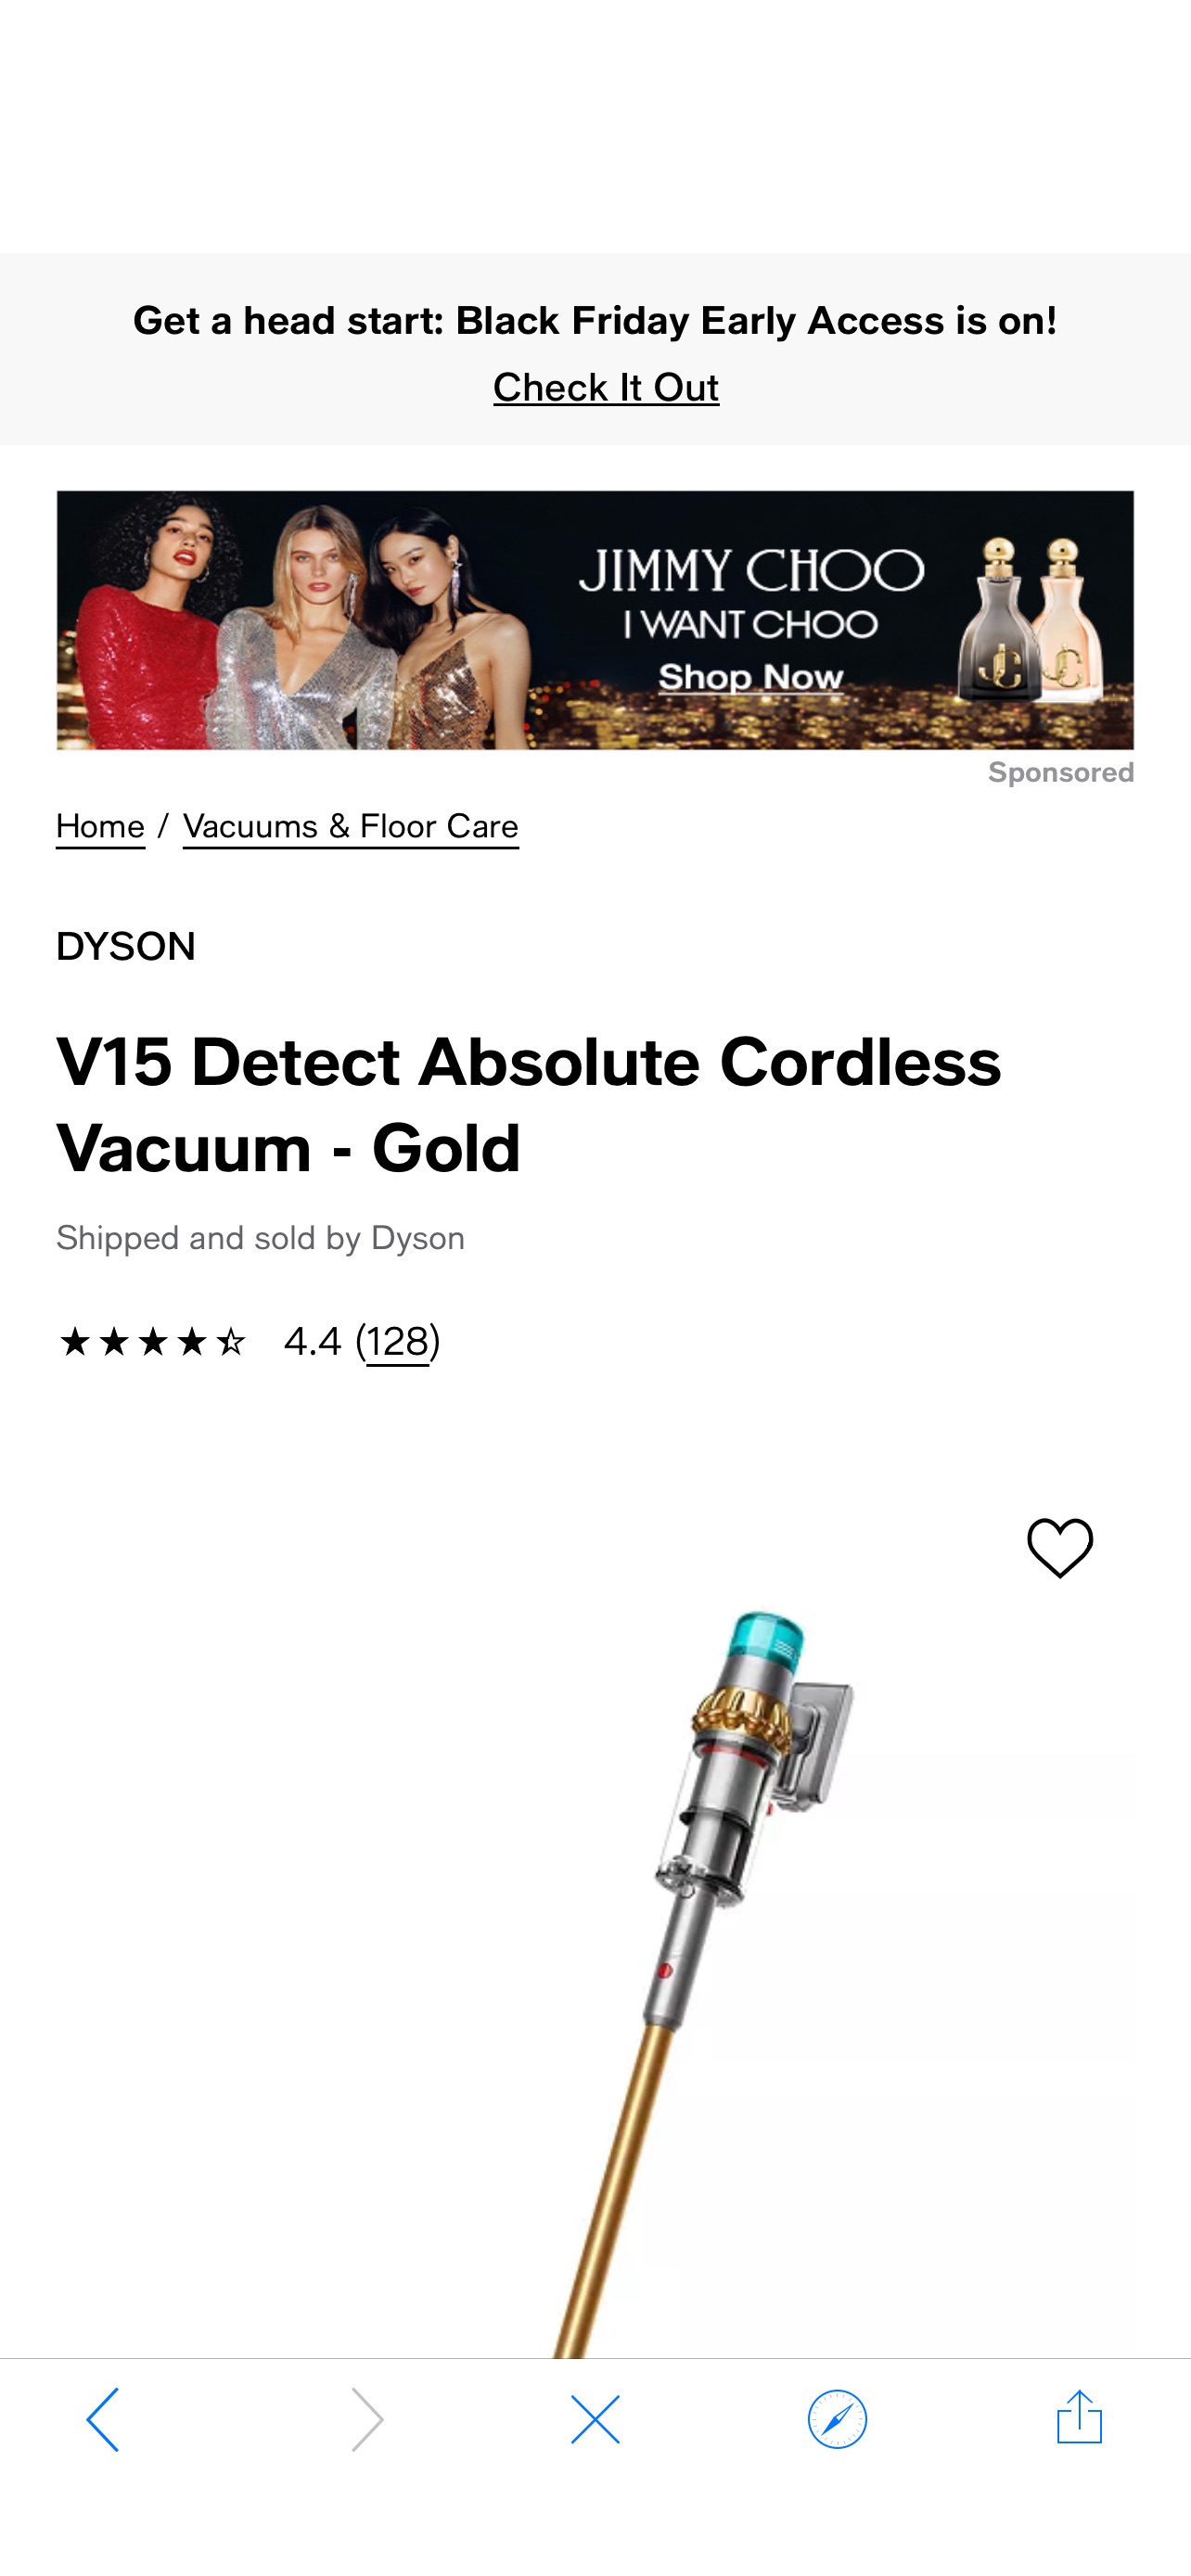 Dyson V15 Detect Absolute Cordless Vacuum - Gold - Macy's